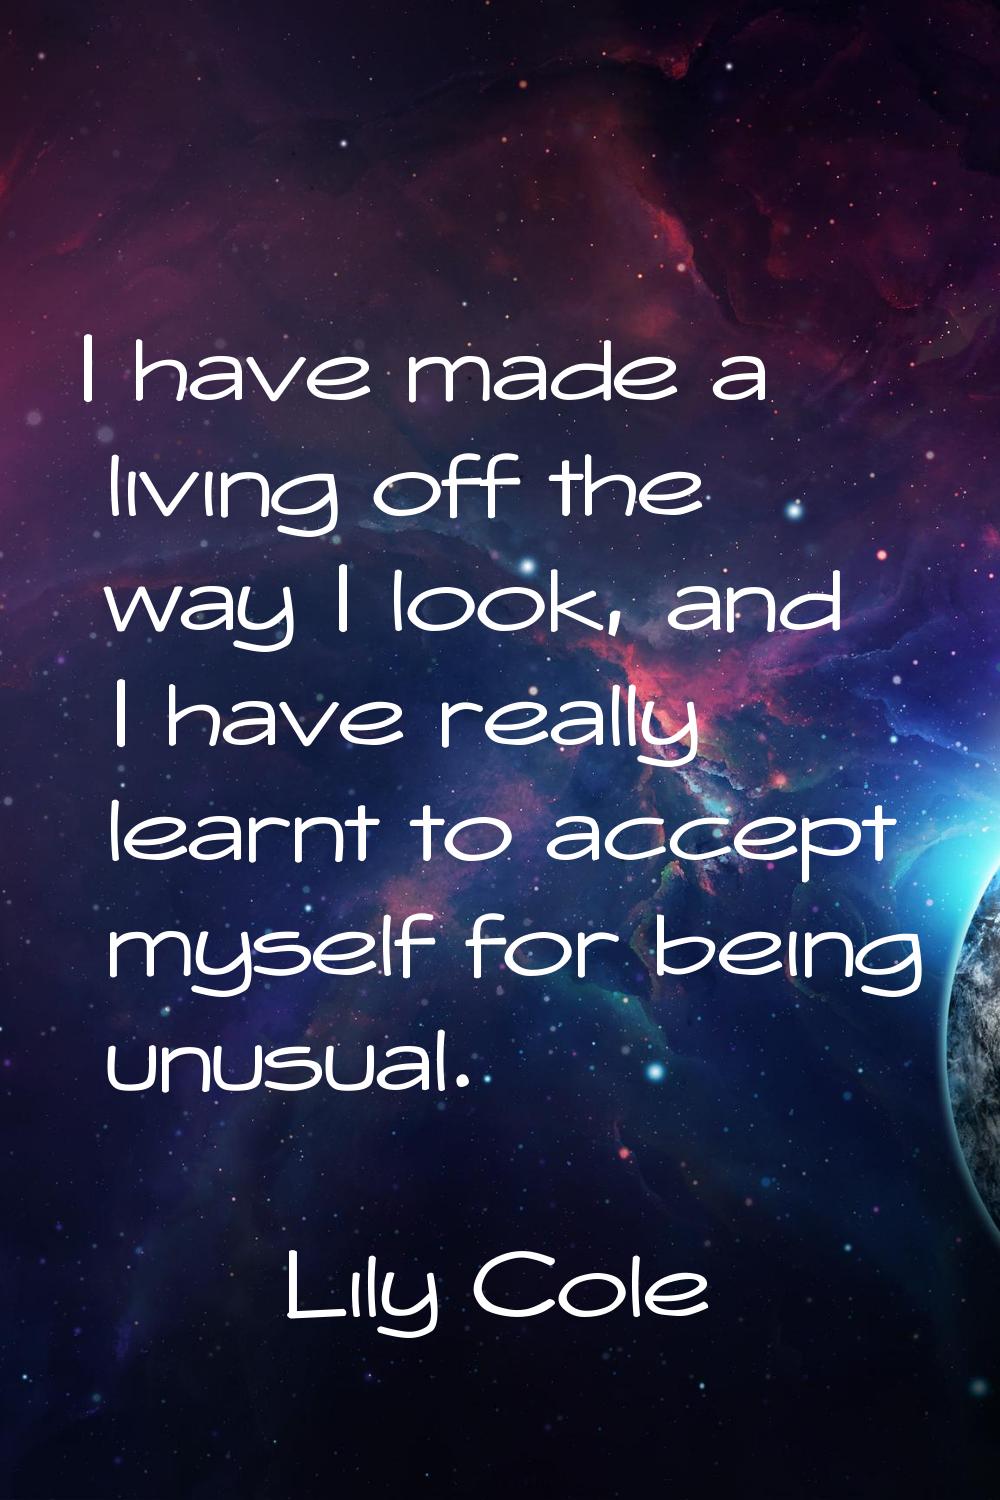 I have made a living off the way I look, and I have really learnt to accept myself for being unusua